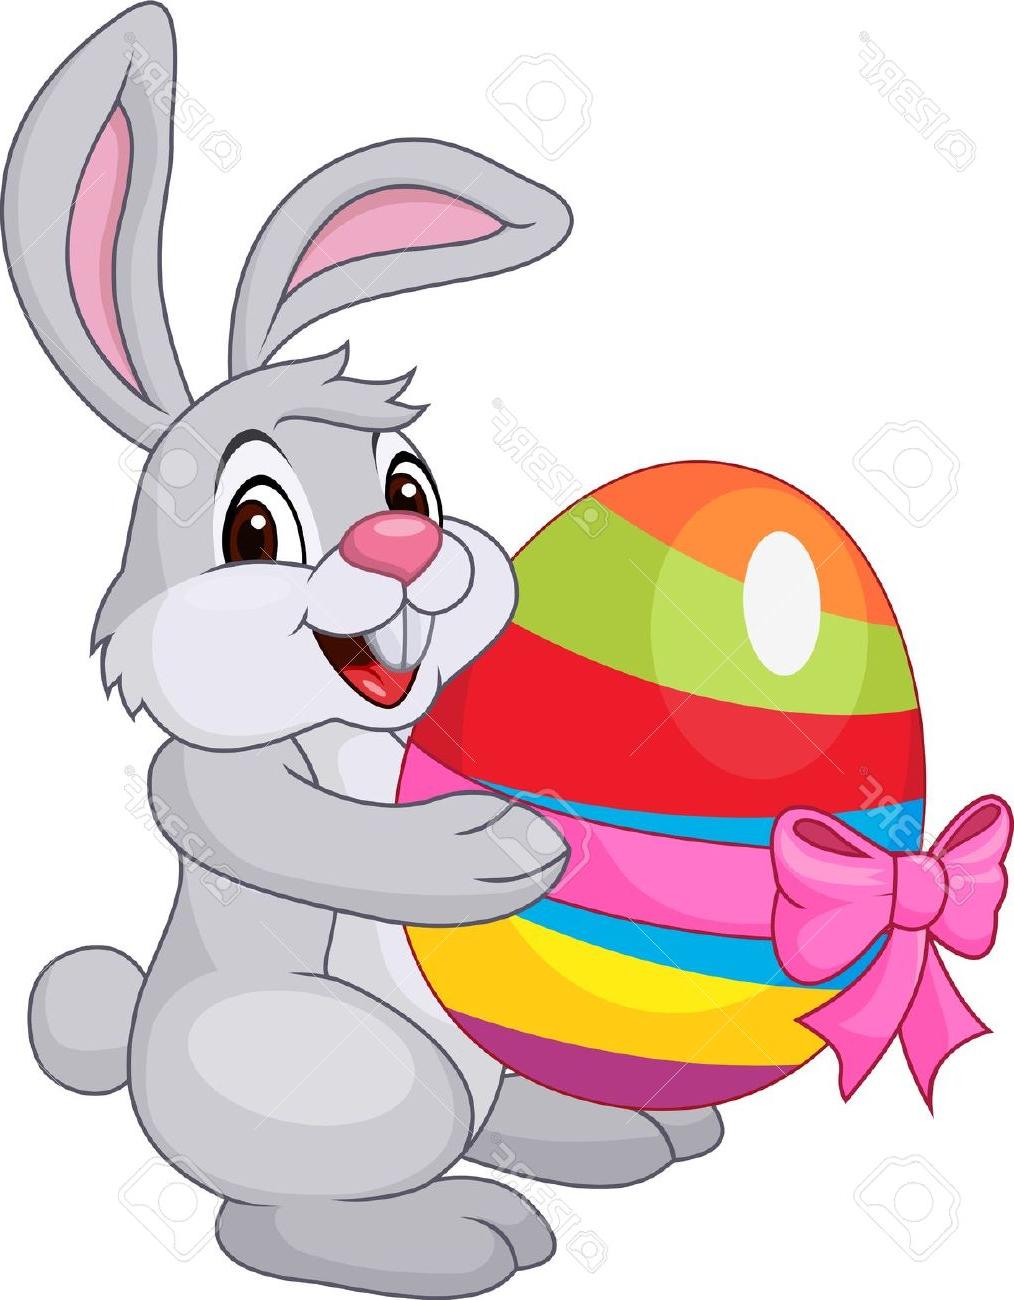 Cute Easter Bunny Clip Art PNG Transparent Background, Free Download